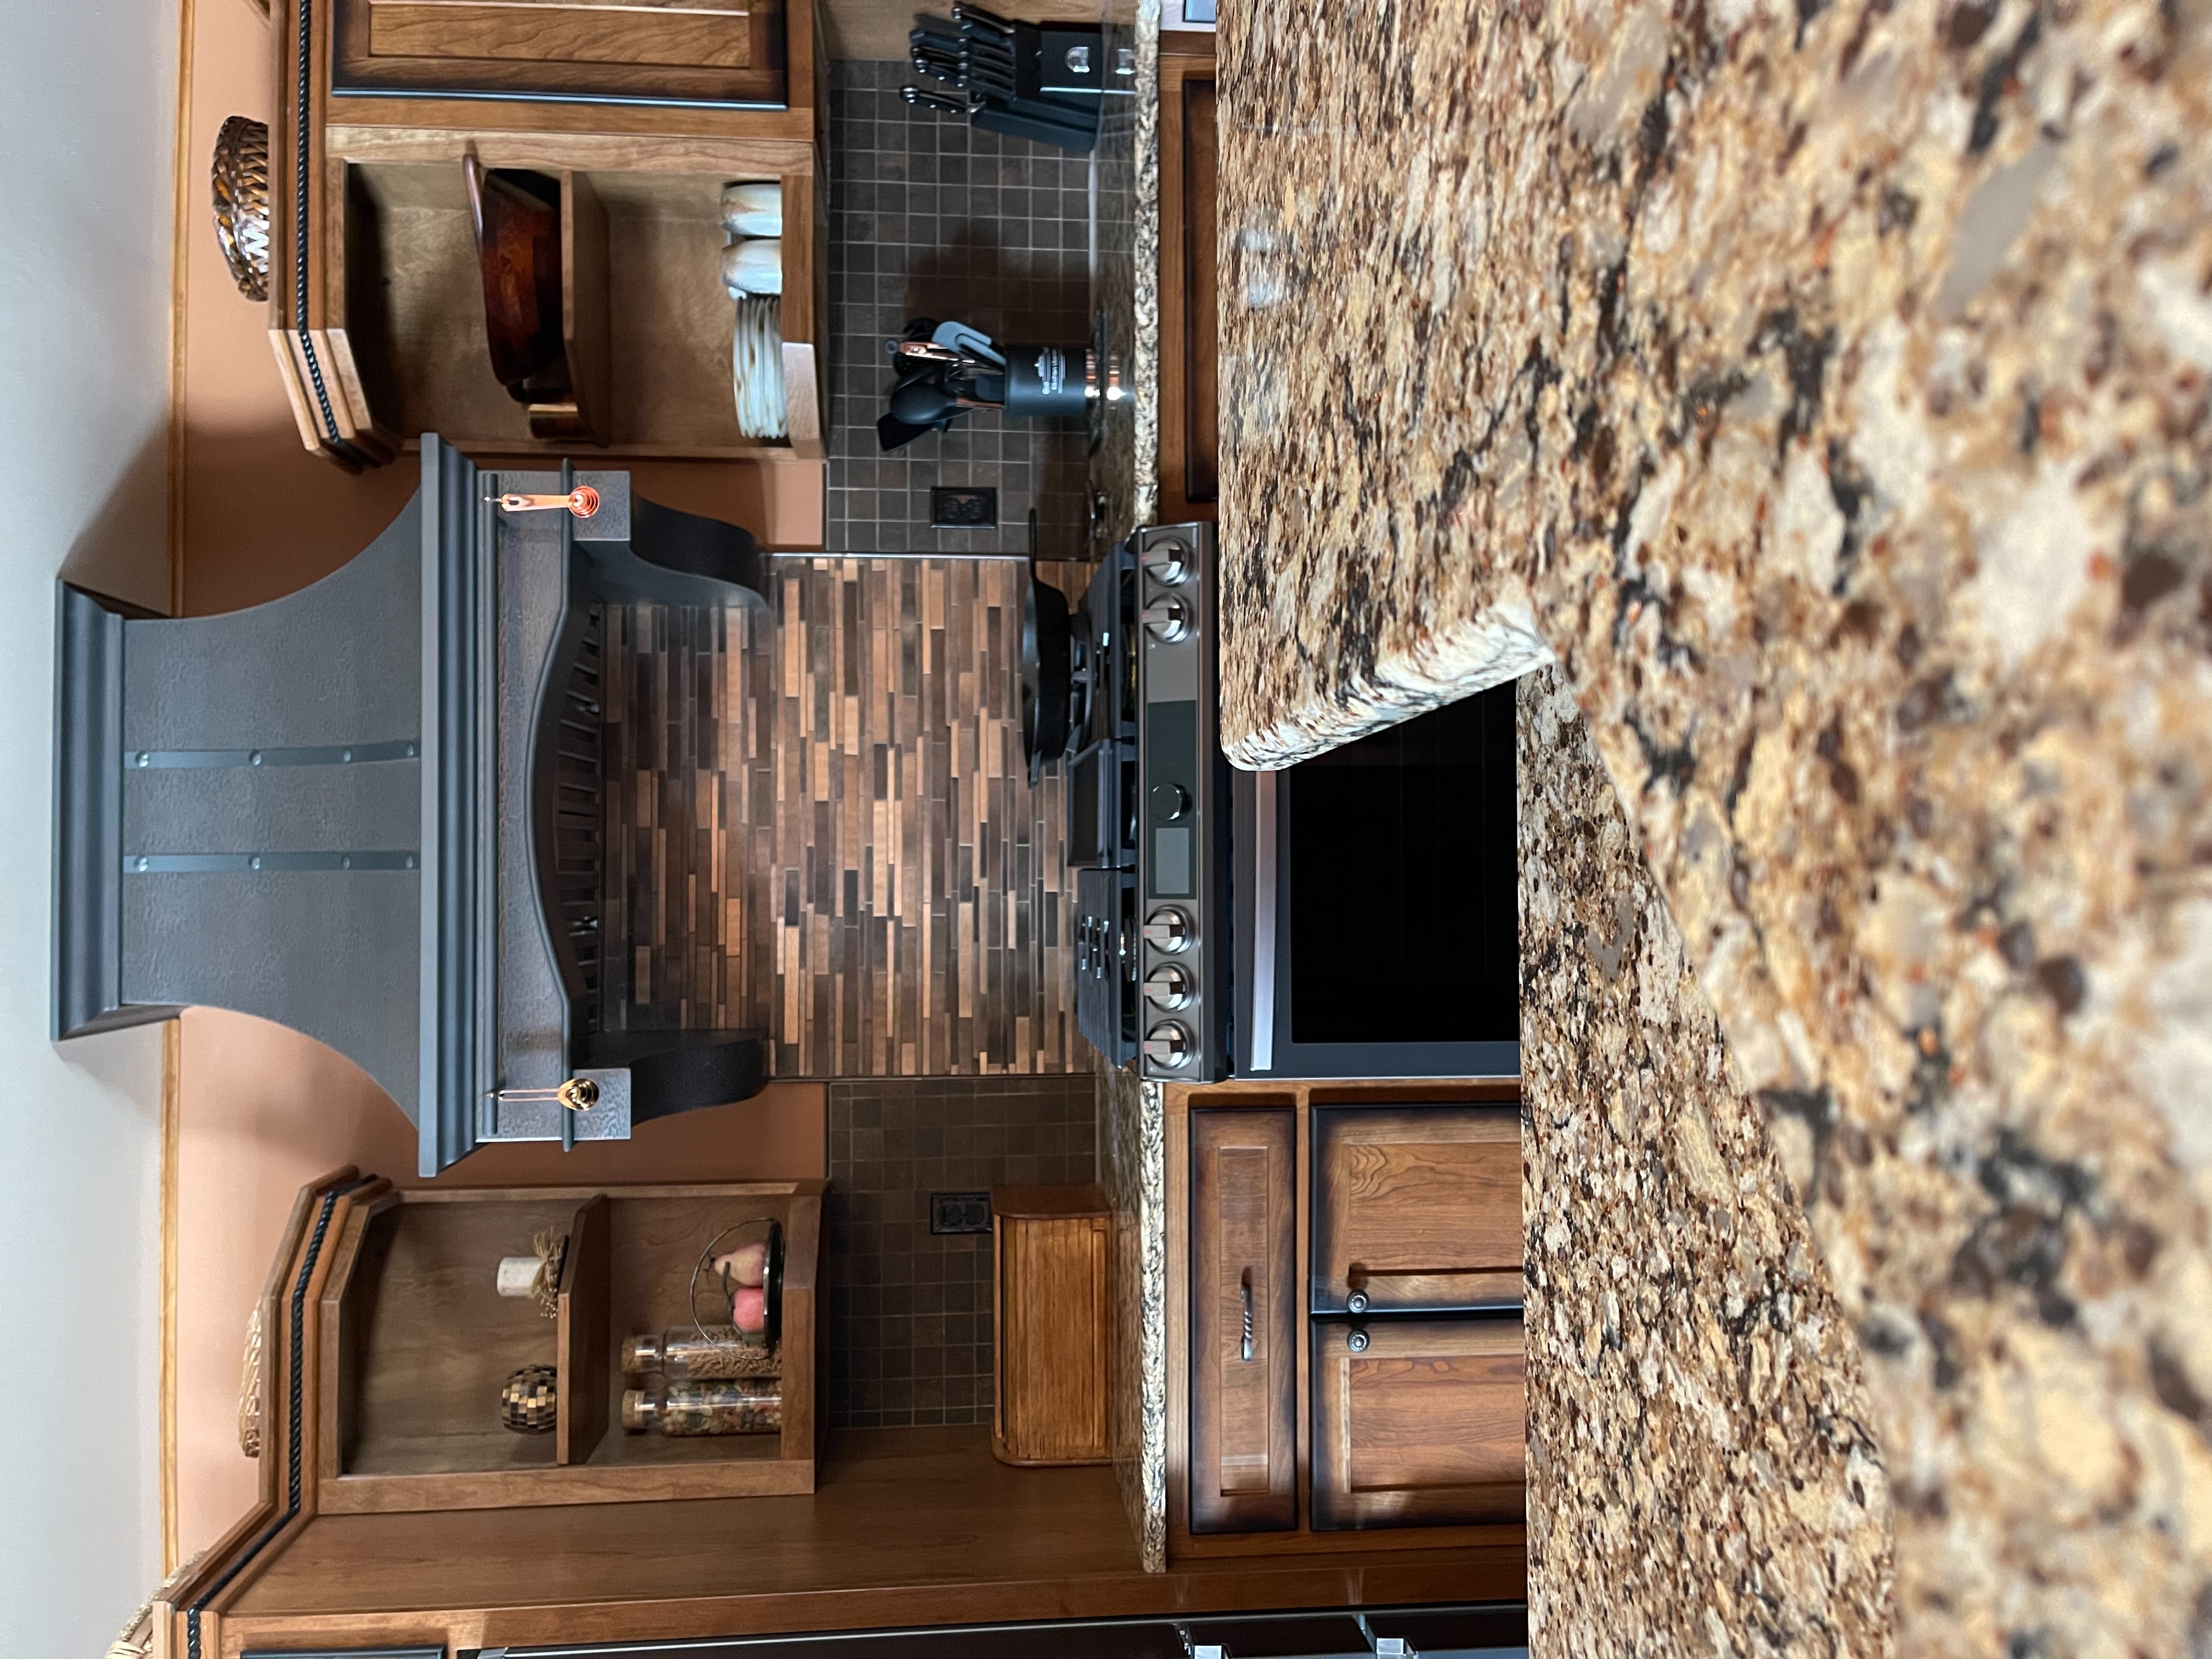 Warmth with rich wood kitchen cabinets and marble kitchen countertops, dazzling copper backsplash, infusing space with a captivating metallic allure